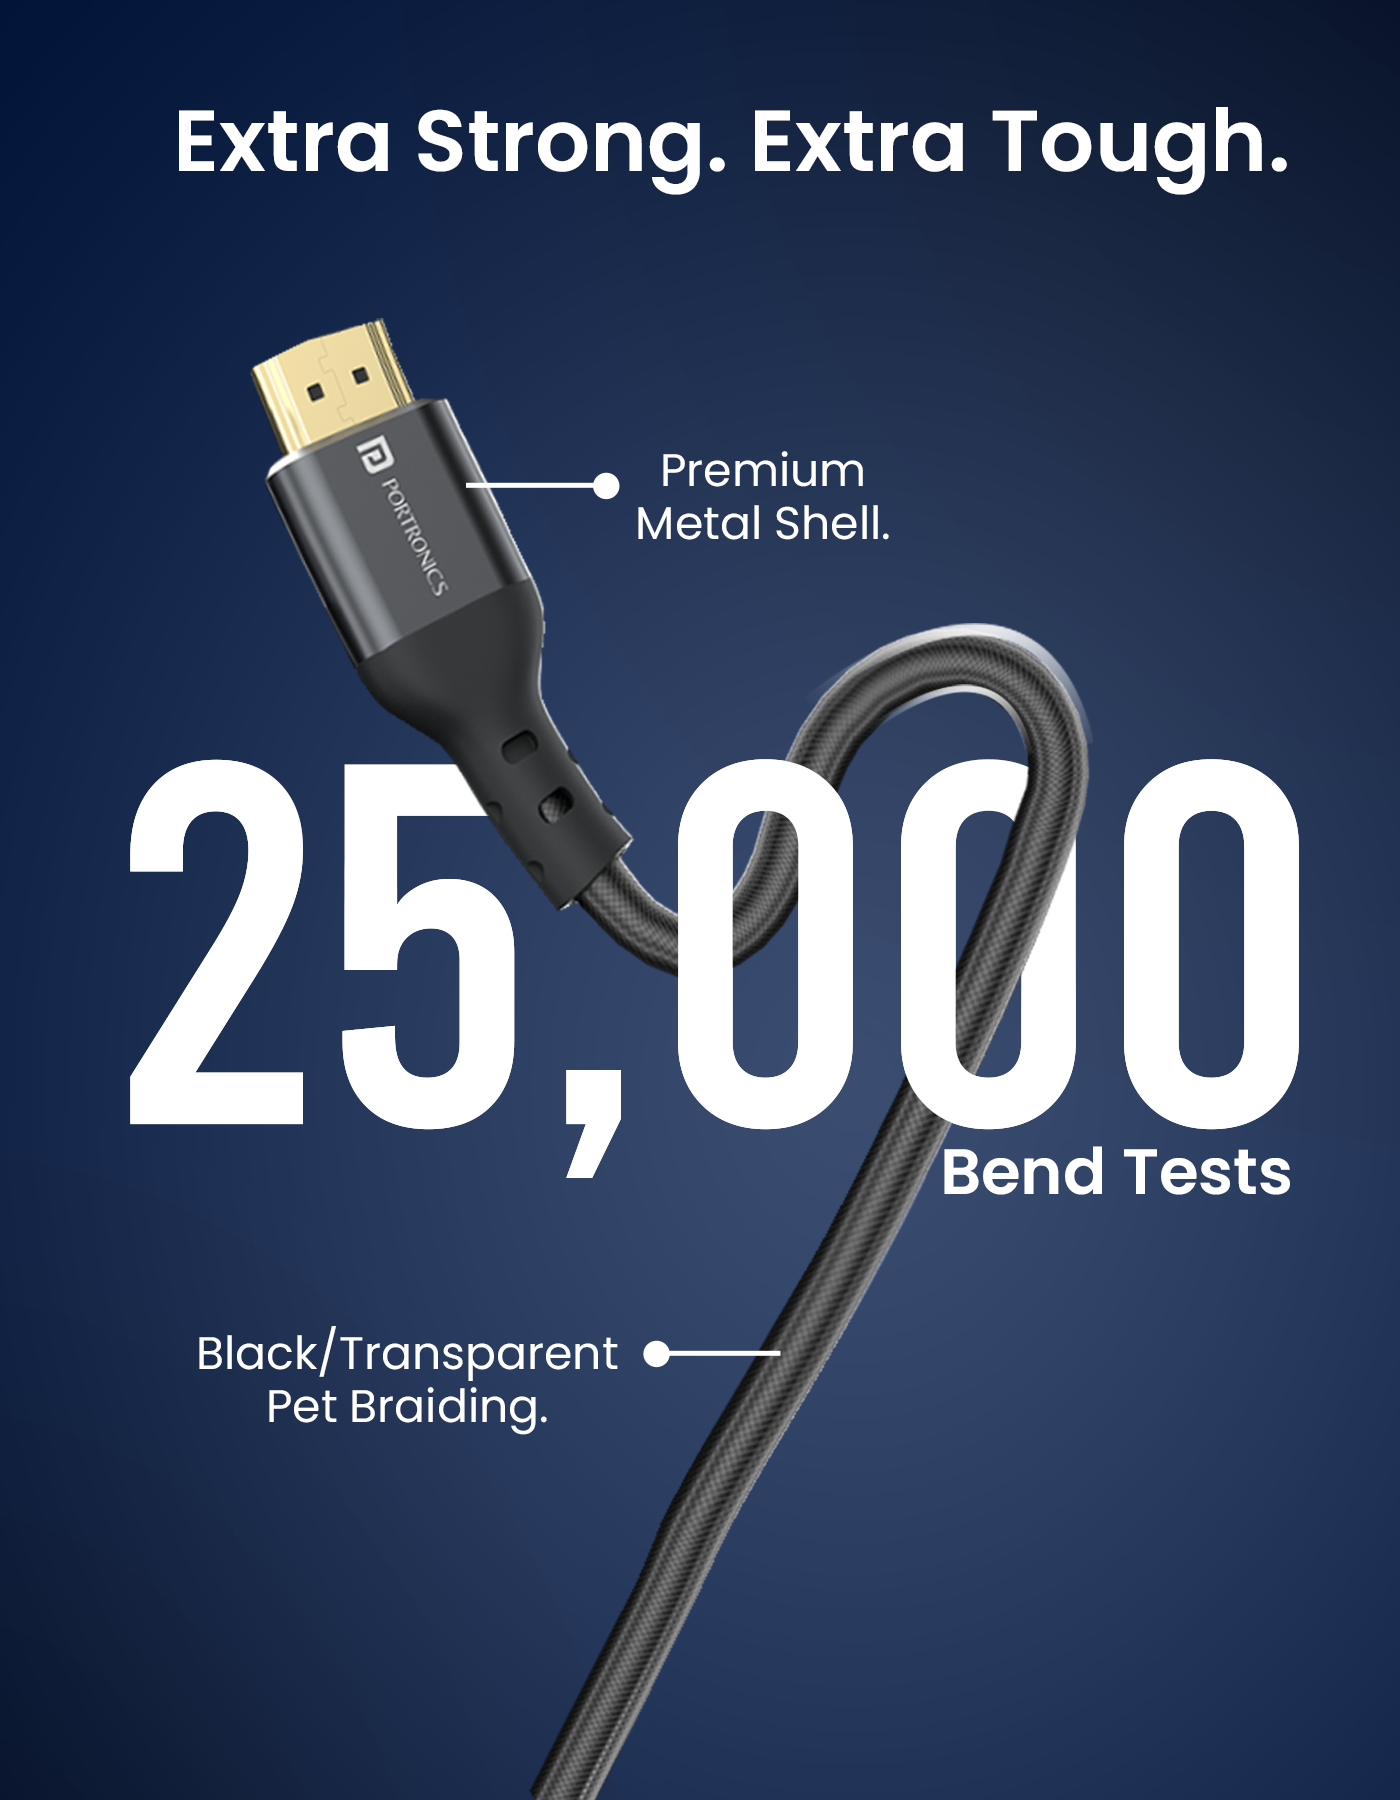 Portronics Konnect Stream 3M 4k hdmi to Hdmi cable with 25000 bend test for long life span